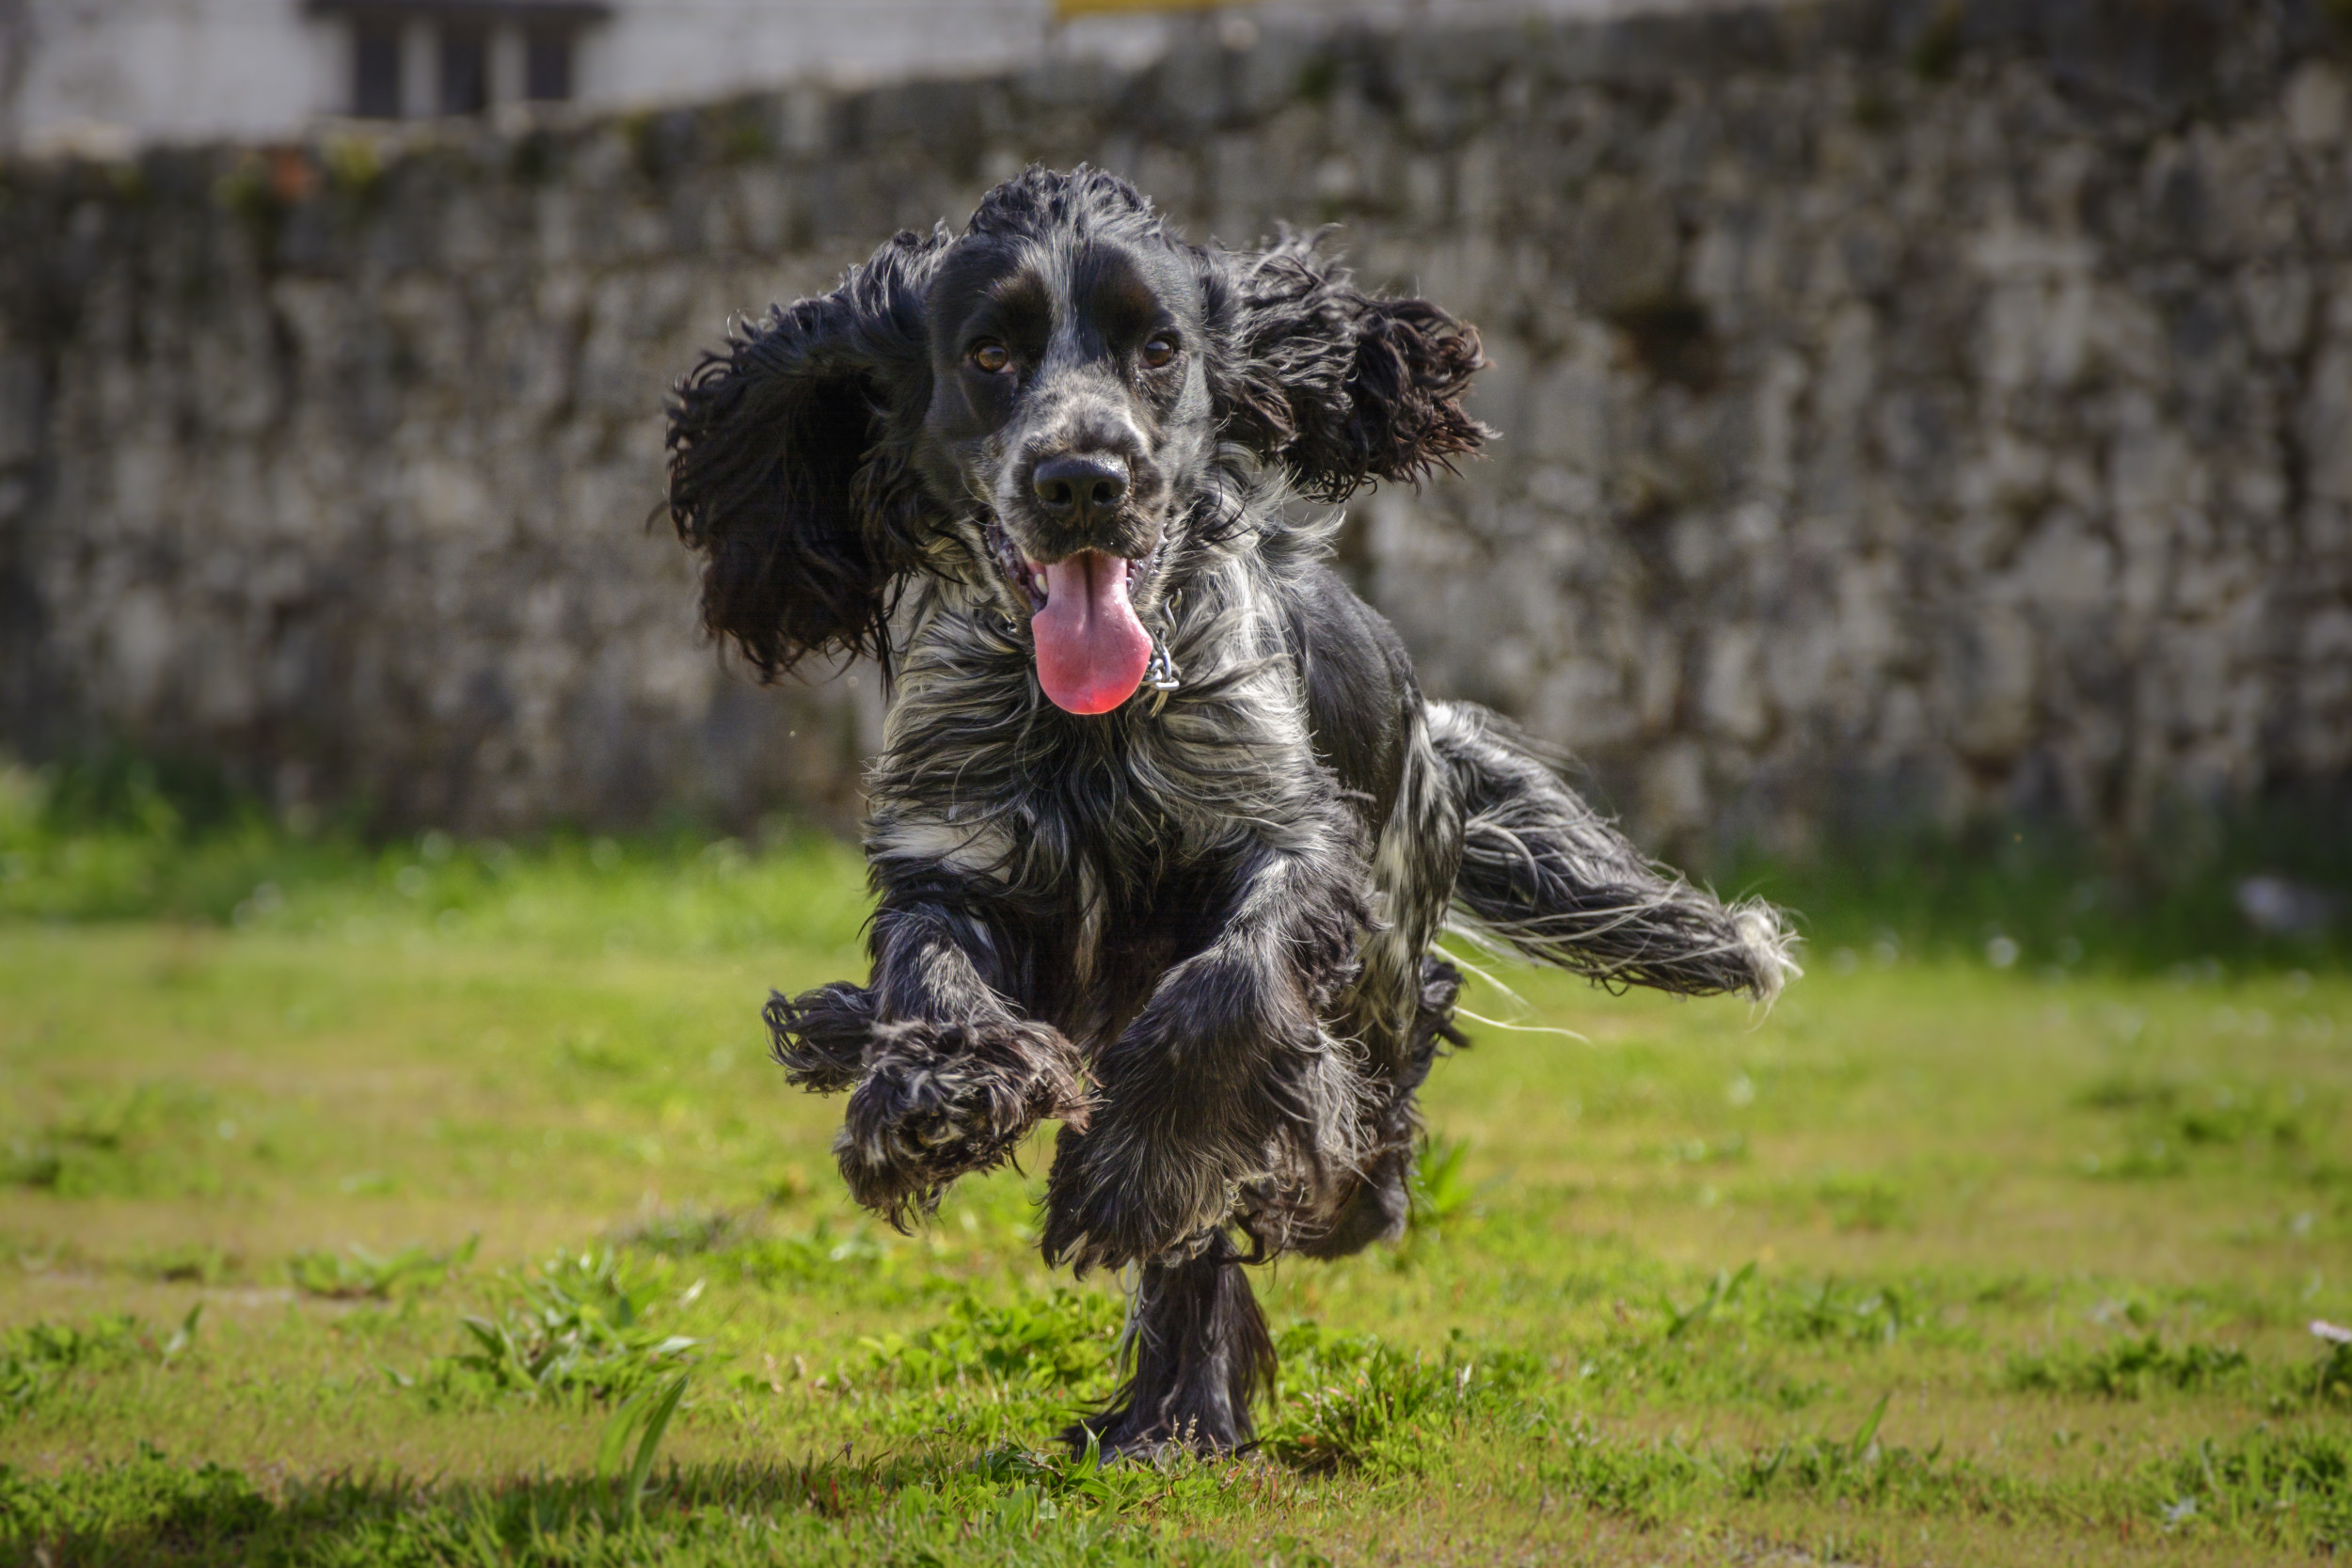 Cocker spaniels are a sporting breed